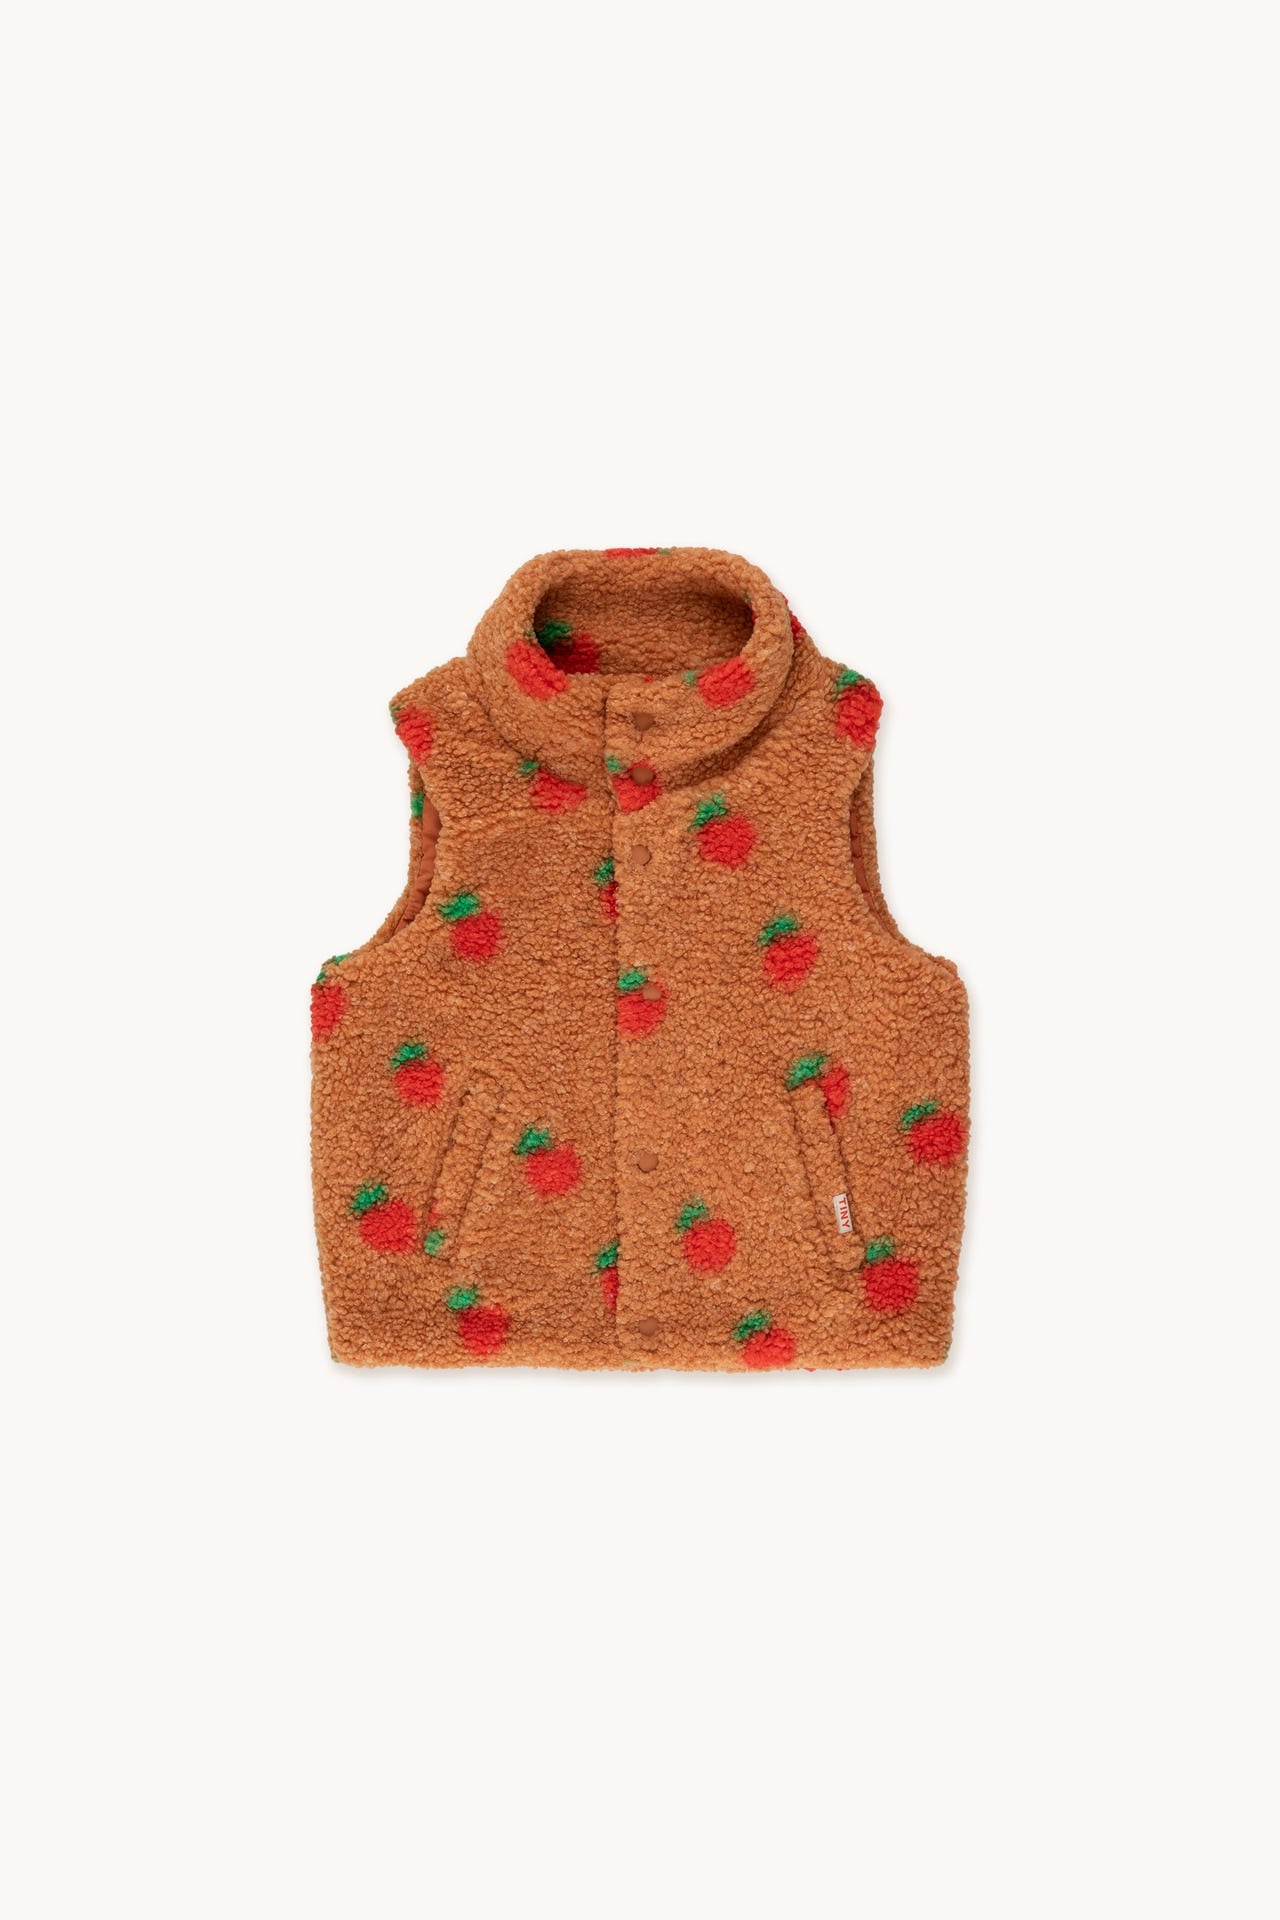 TINYCOTTONS APPLES SHERPA VEST light brown